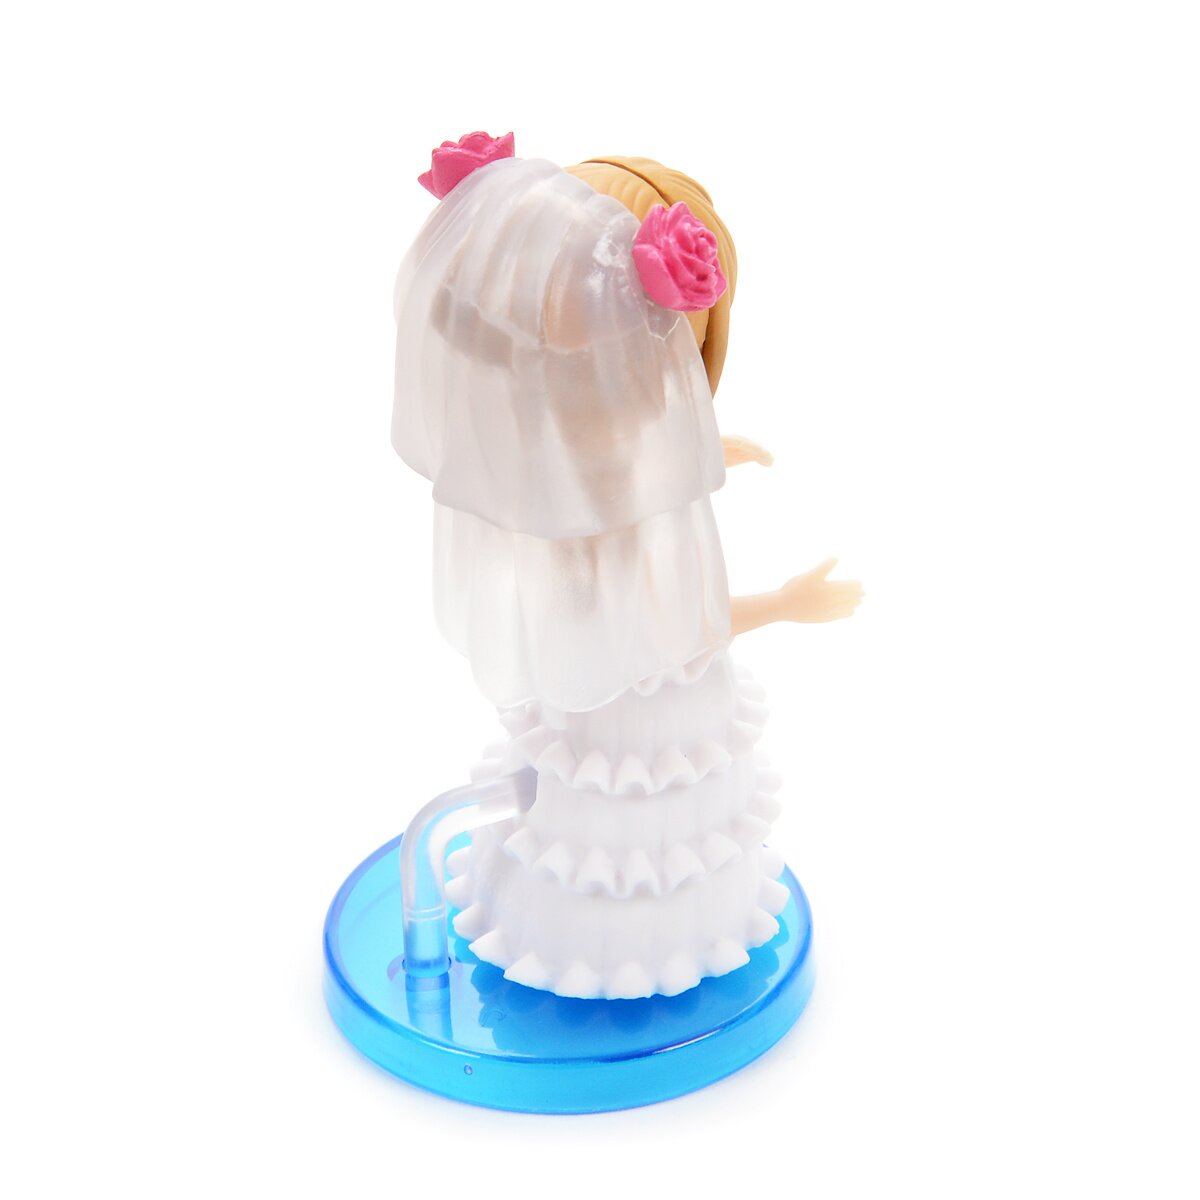 One Piece World Collectable Figure: Whole Cake Island Vol. 2